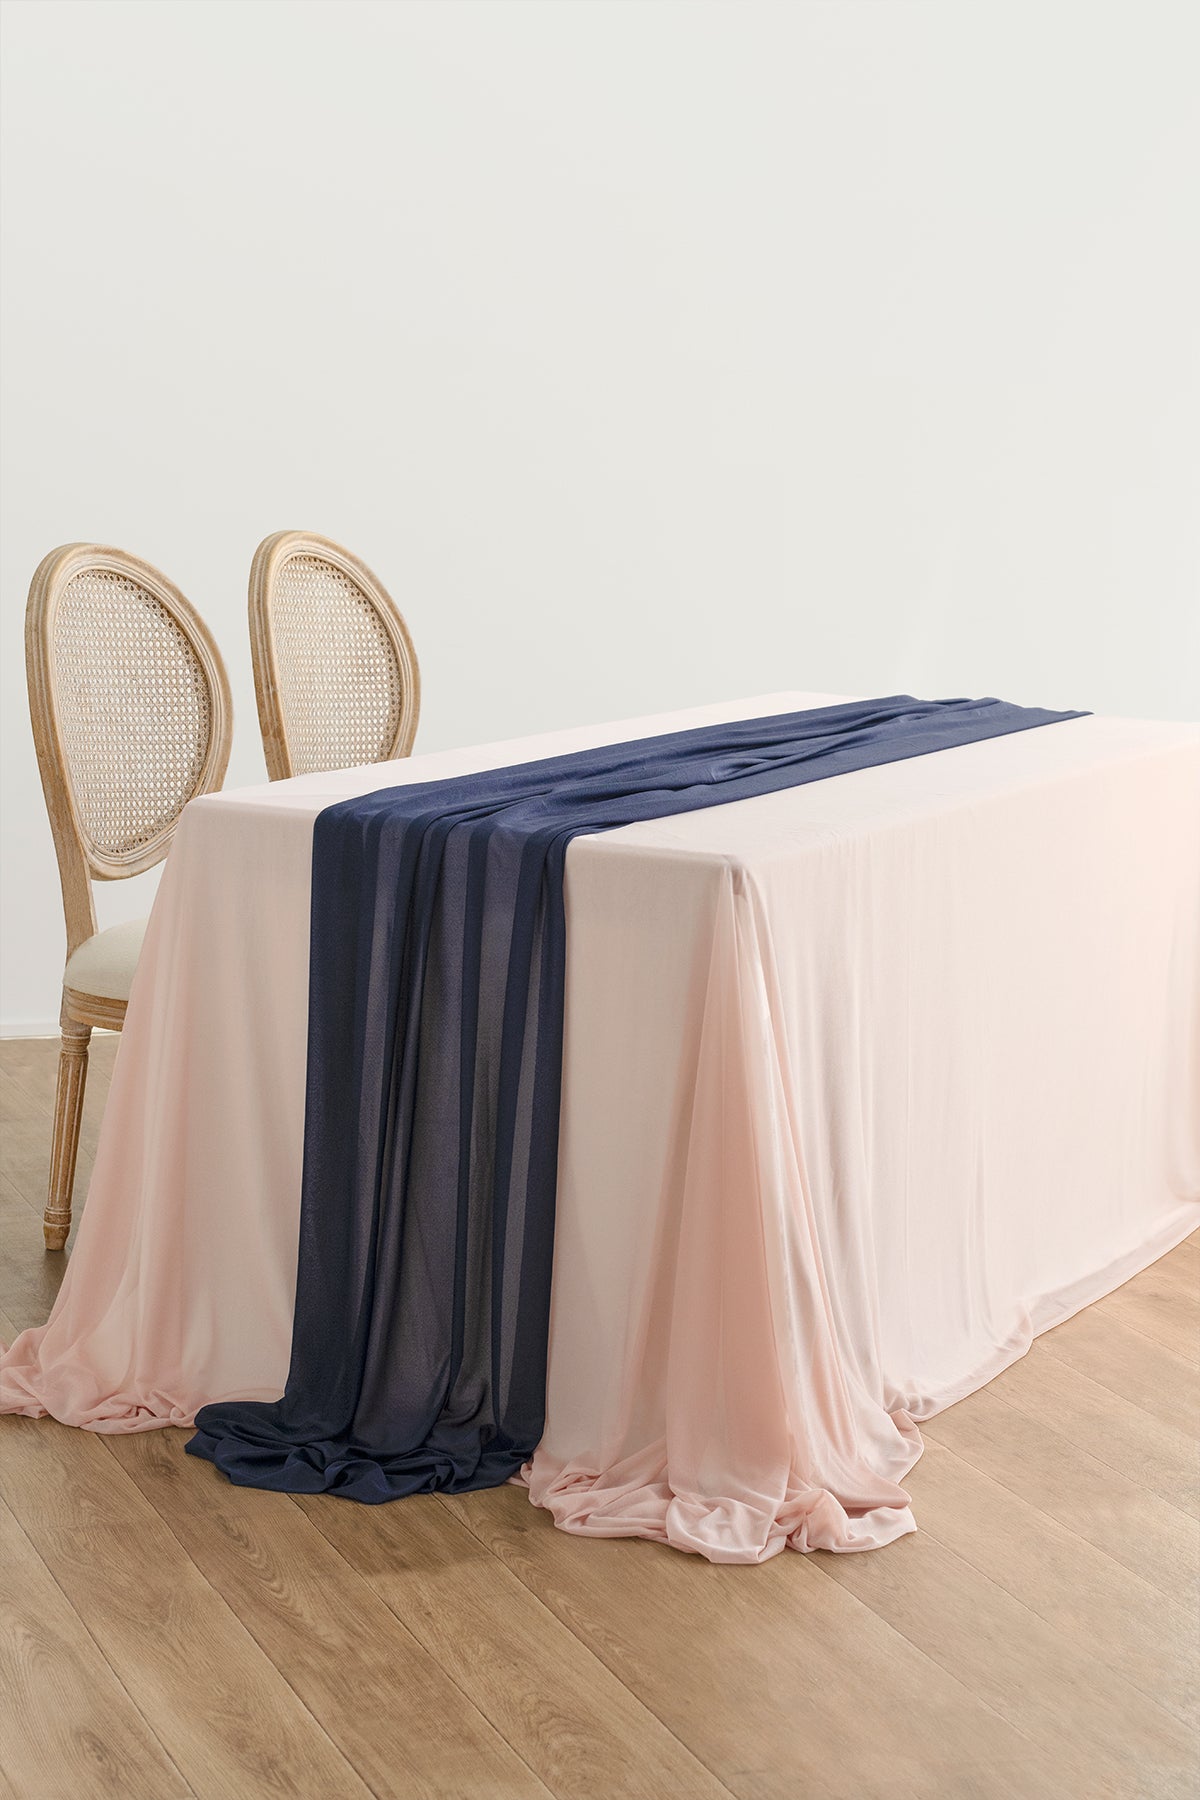 Tablecloth & Table Runner Set for Sweetheart/Head Table - 15 Colors